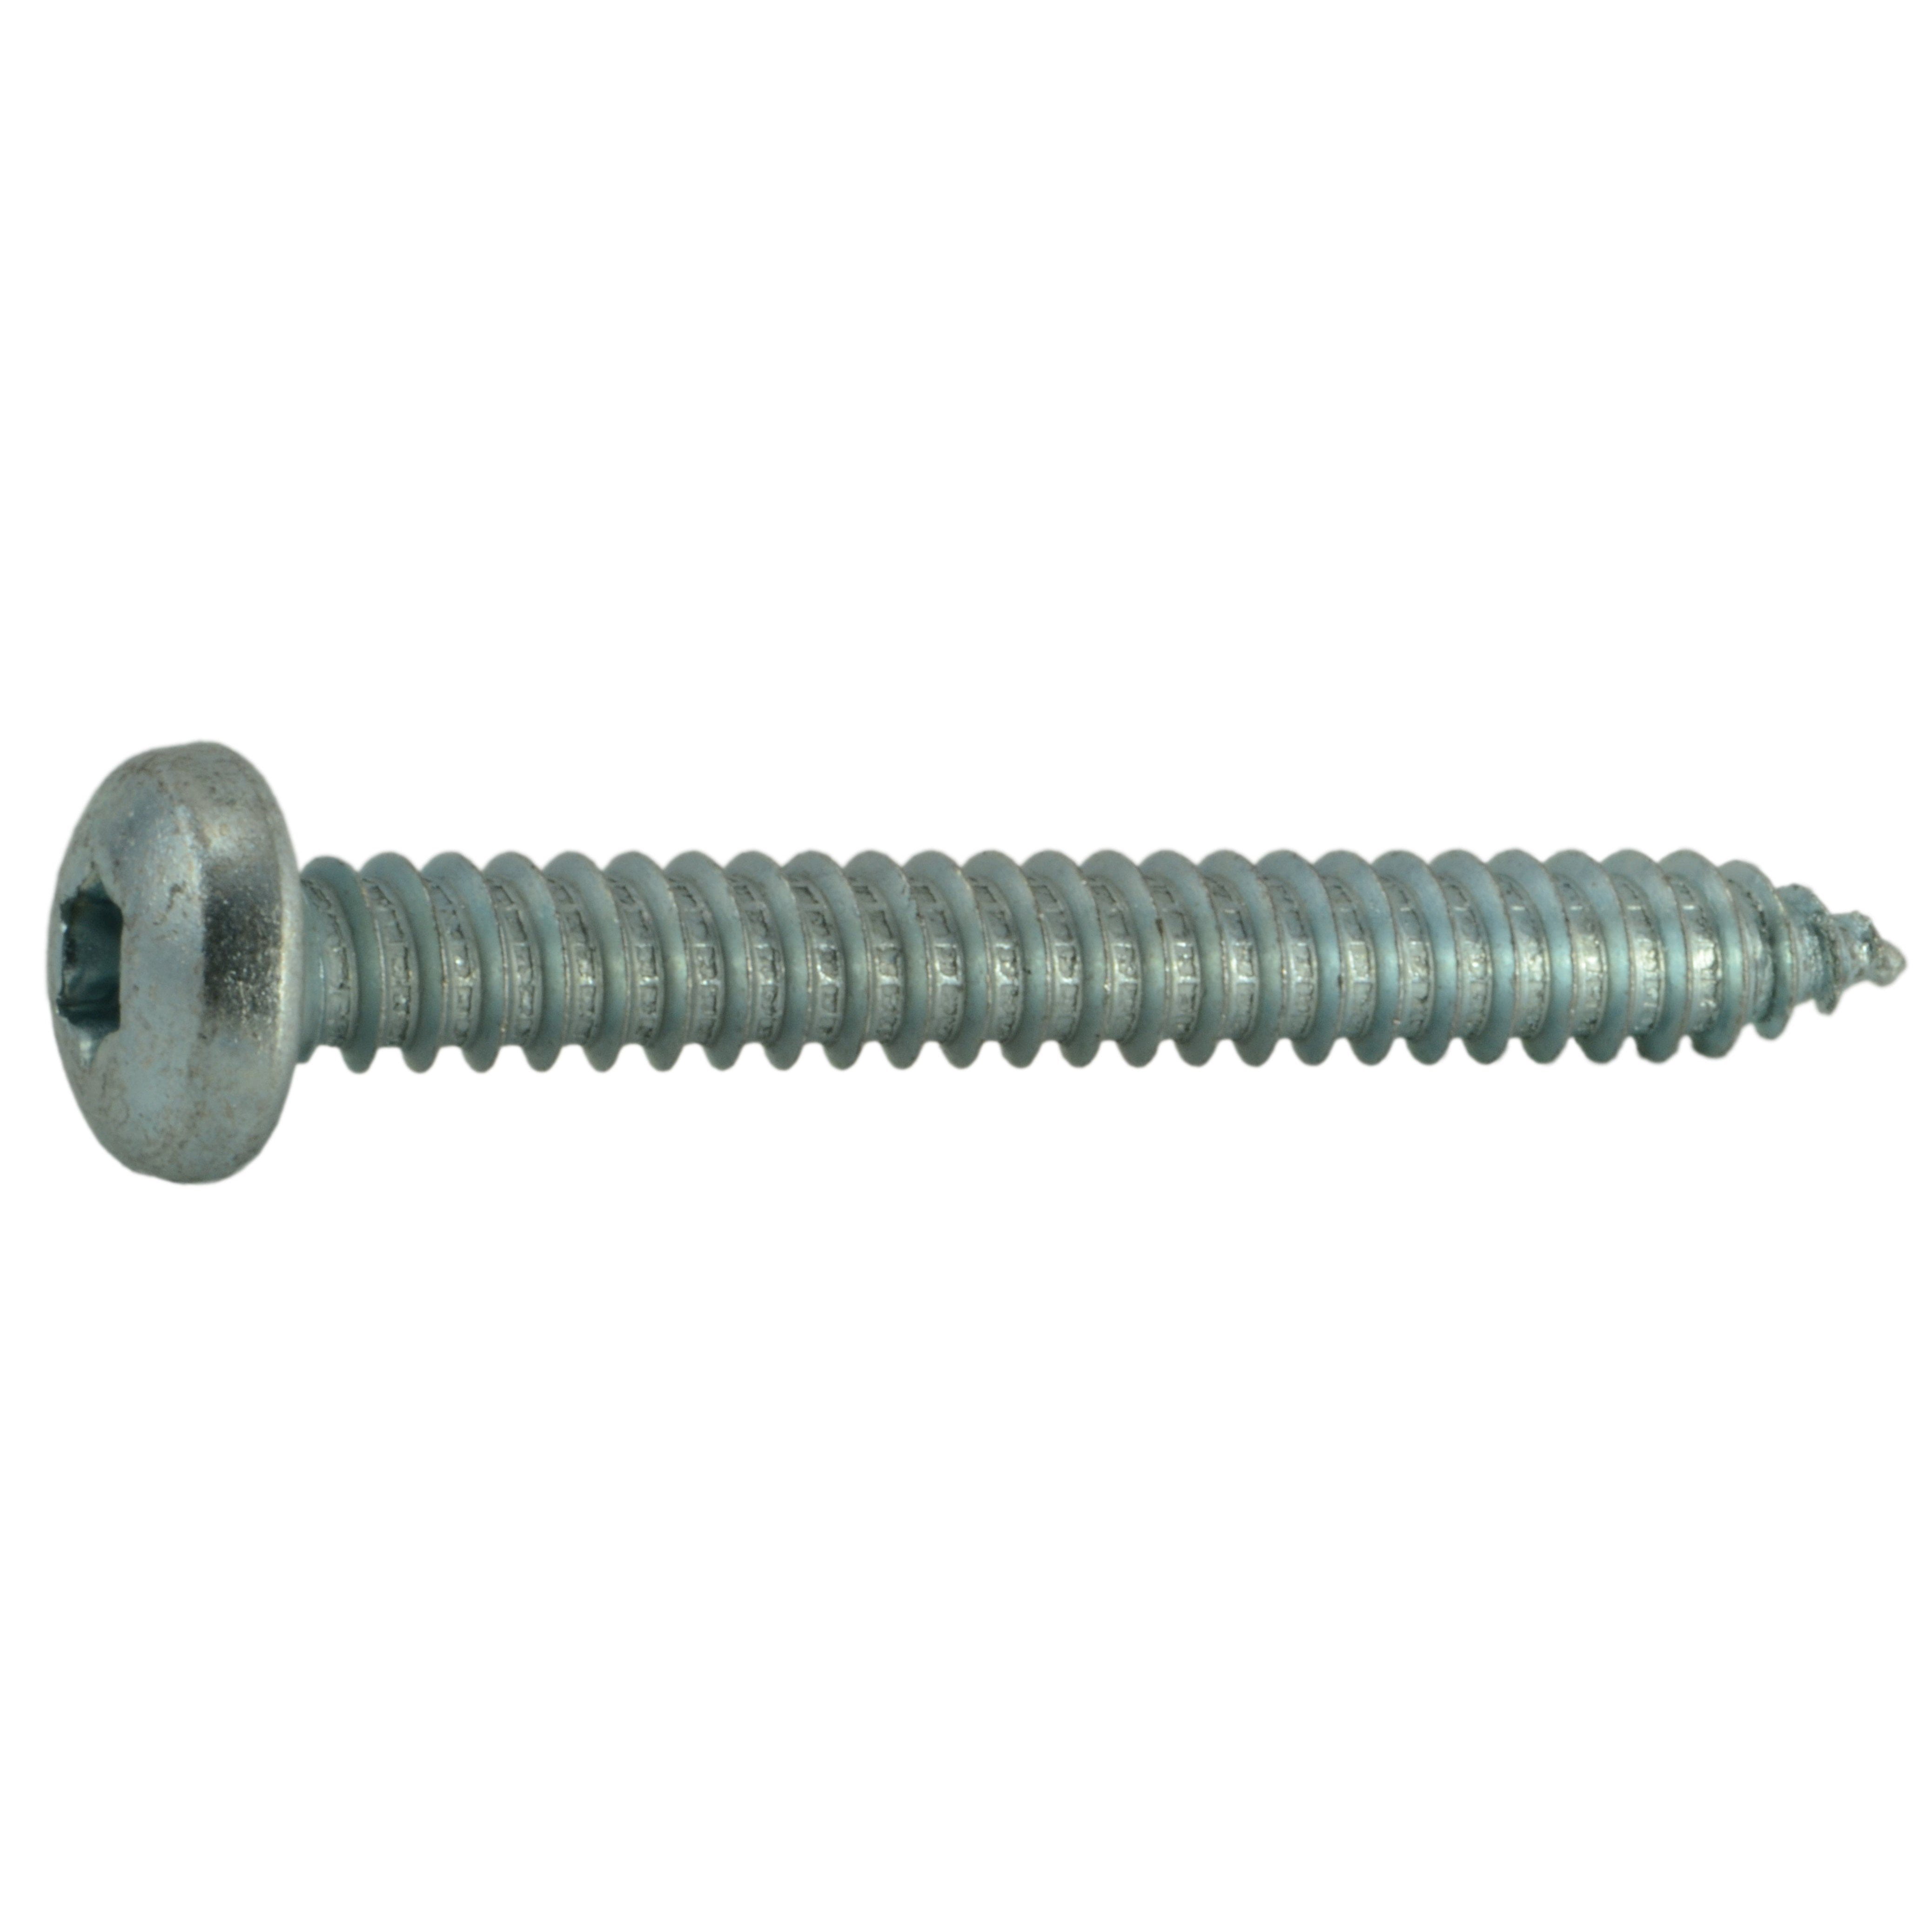 50-PCS Crown Bolt #6x1/2 in Flat Head Square Drive Stainless Sheet Metal Screws 